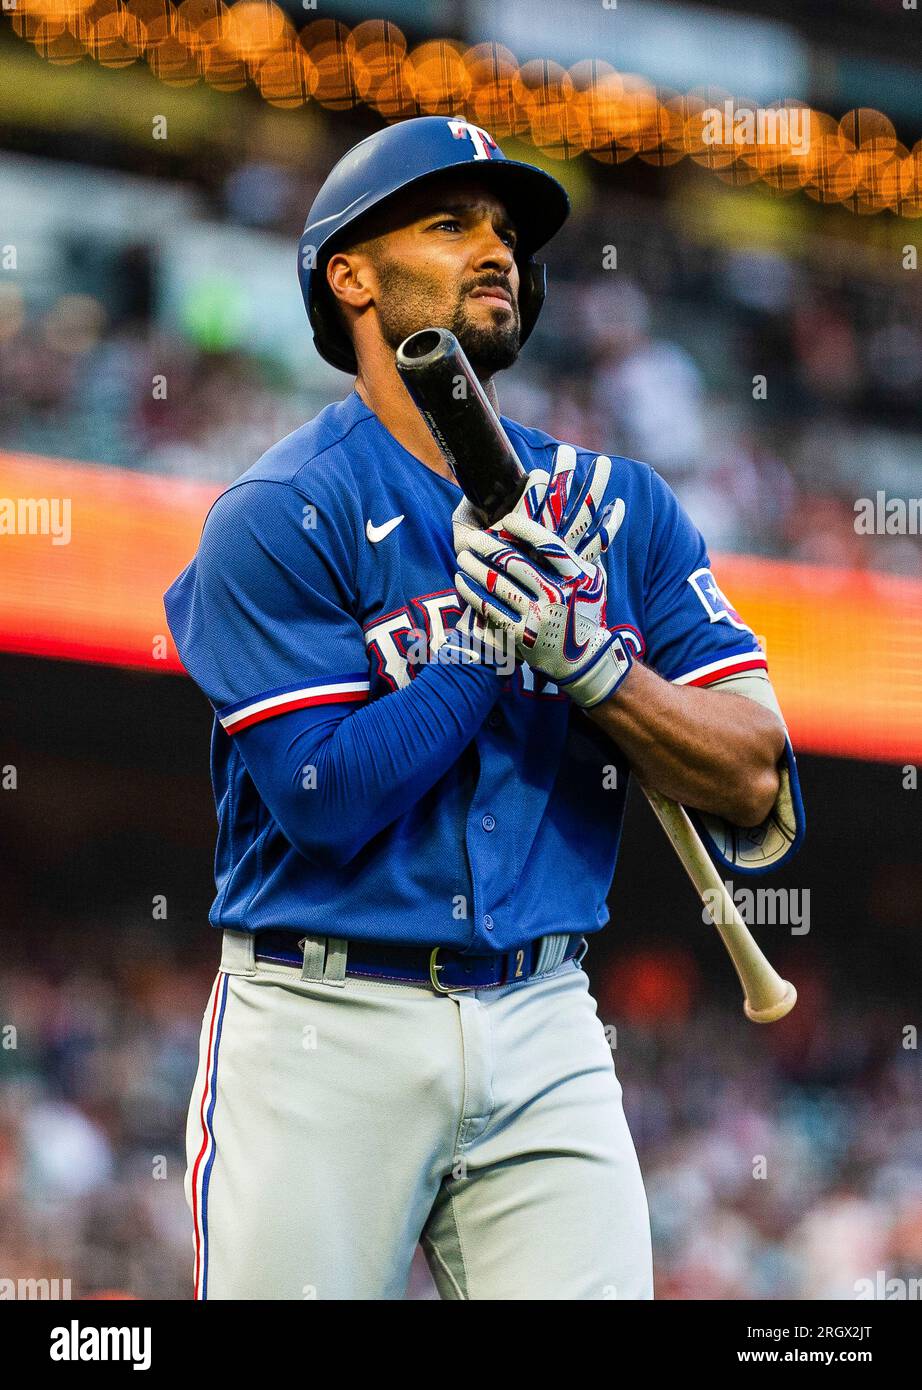 August 11 2023 San Francisco CA, U.S.A. Texas Rangers second baseman Marcus  Semien (2) walks back to the dugout after stricking out in the first inning  during MLB game between the Texas